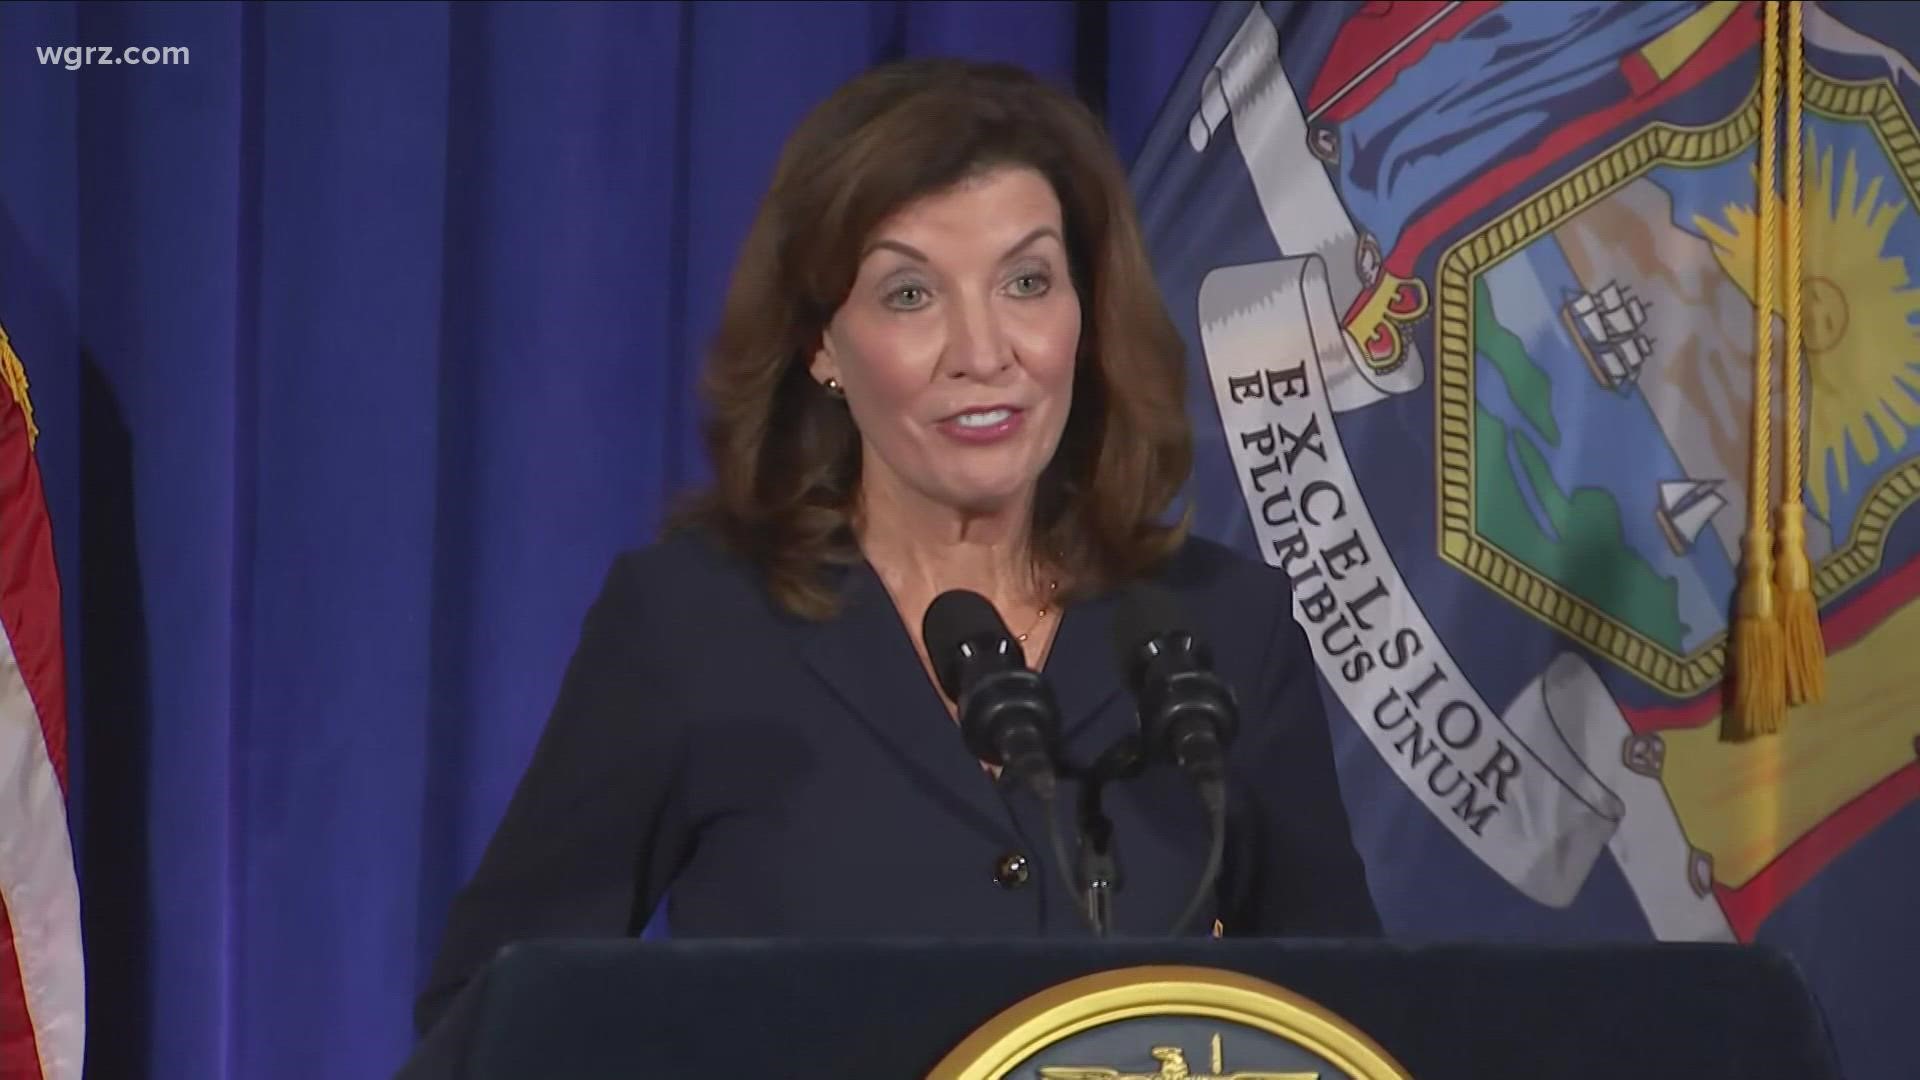 Kathy Hochul has been governor for three weeks, and it looks like she's getting good marks from New Yorkers, at least the ones who know who she is.